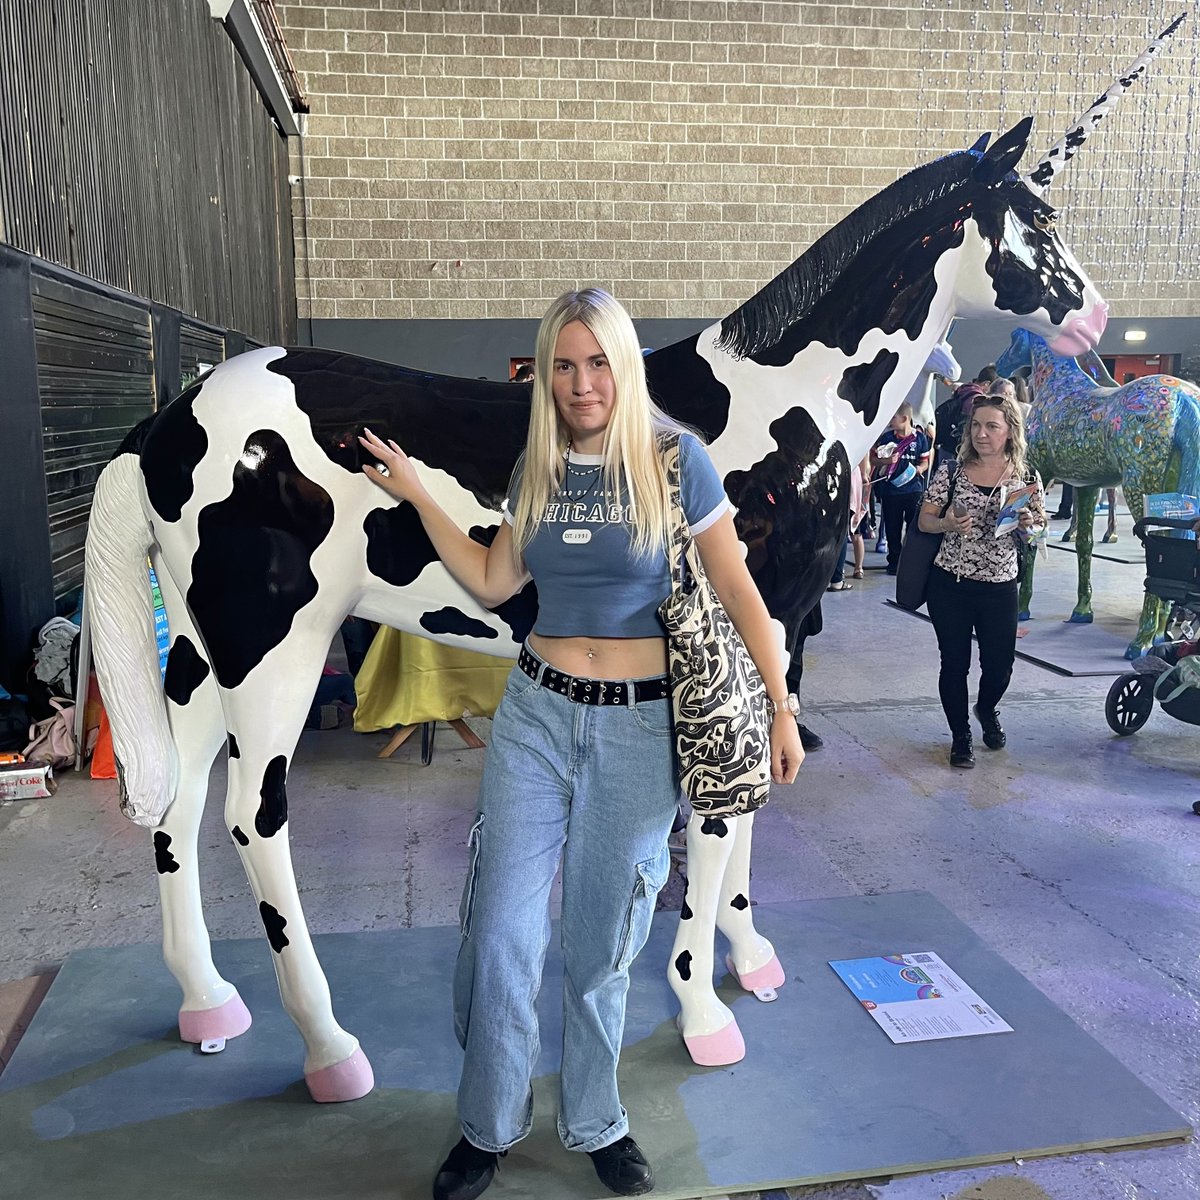 So today, I attended the Unicornfest Farewell Festival to get my photo taken with the 61st mystery unicorn that was being revealed at the show- a cow! pretty random huh? 🐄 Now I’ve officially found them all 🙂